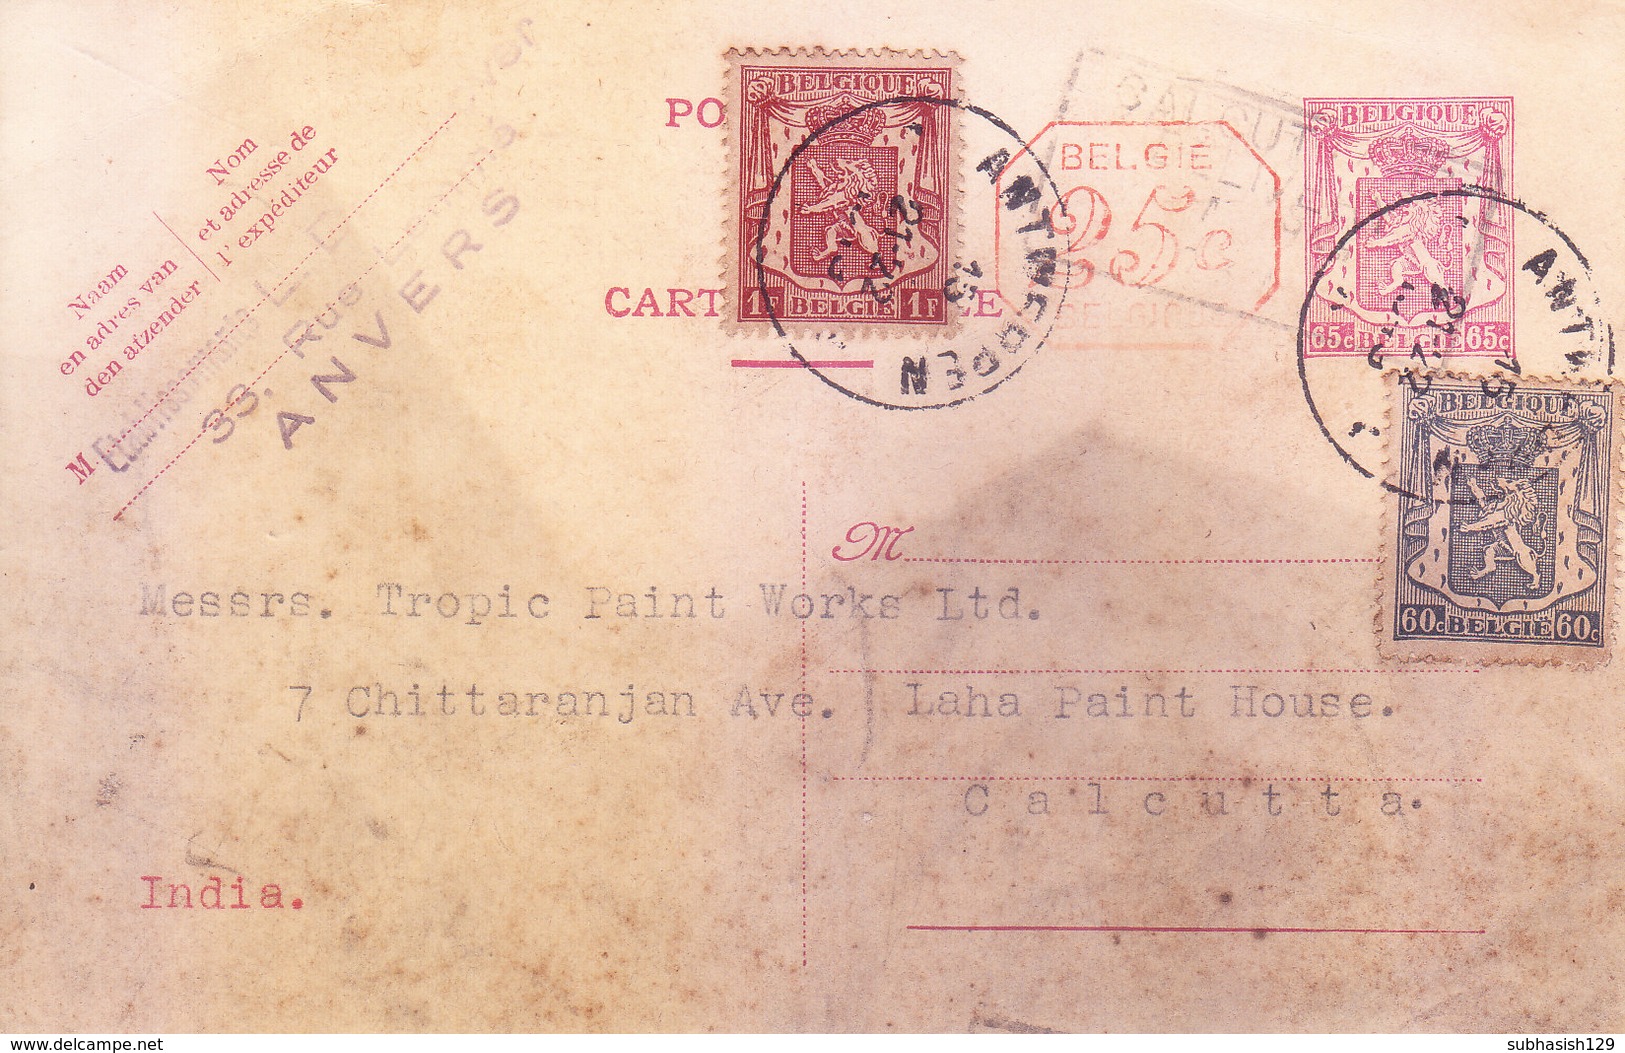 BELGIUM 1949 UPRATED POST CARD POSTED FROM ANTWERPEN FOR INDIA - USE OF ADDITIONAL 2V DIFFERENT STAMPS - Brieven En Documenten